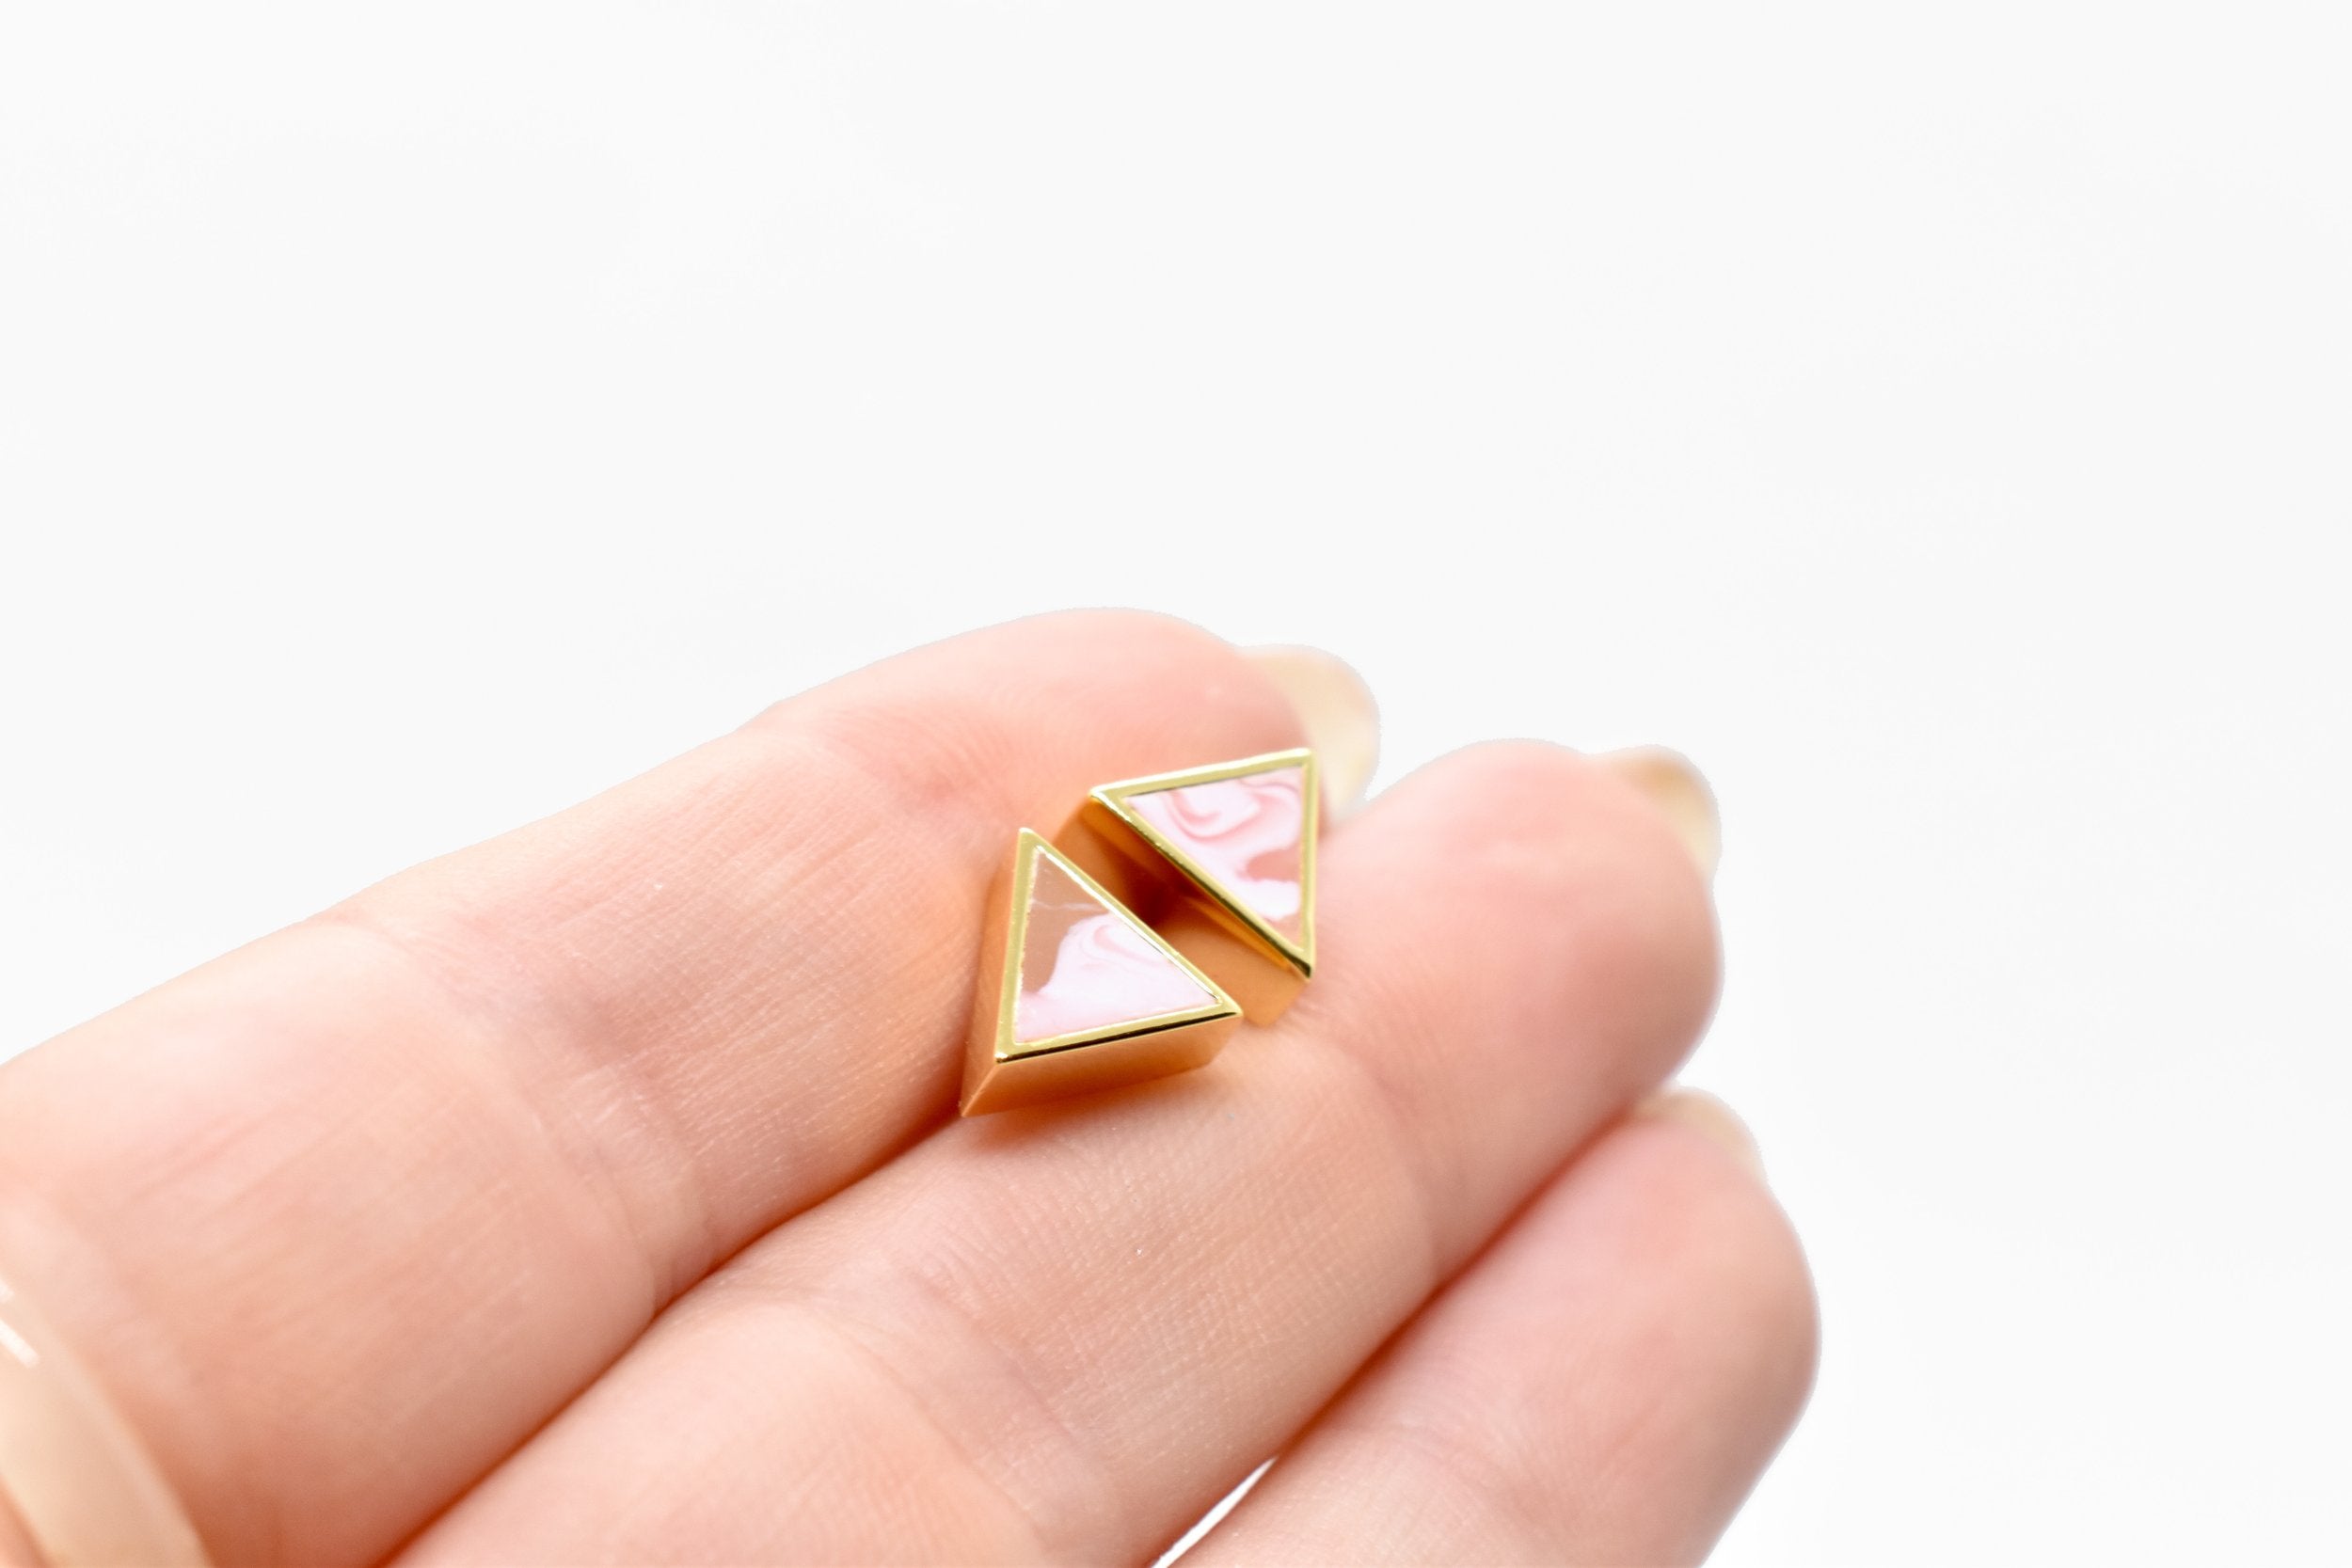 a hand holding a tiny pair of studs in pastel pink tiny triangle earrings with 24k gold plating.